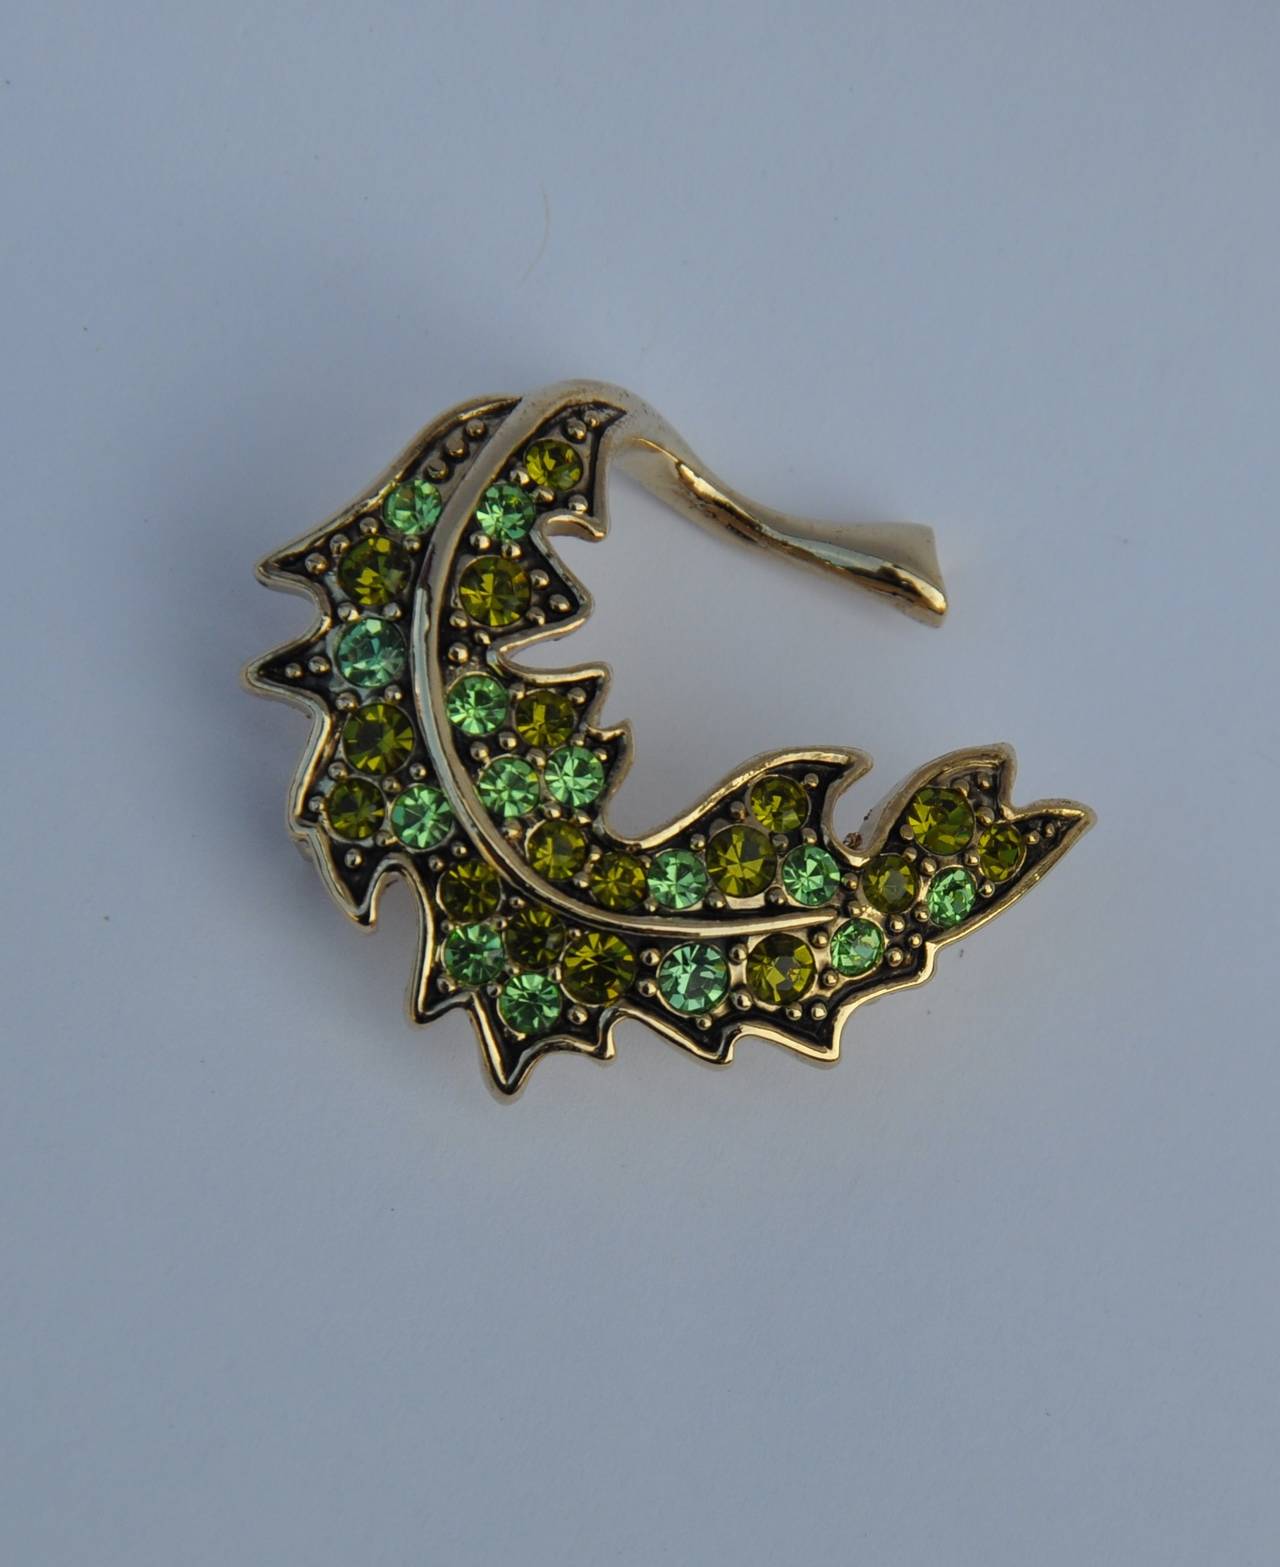 Trifari gilded gold vermeil finish with emerald green rhinestones "Leaf" brooch measures 1 5/8" in length across, 1 3/8" in height and 2/8" in depth.